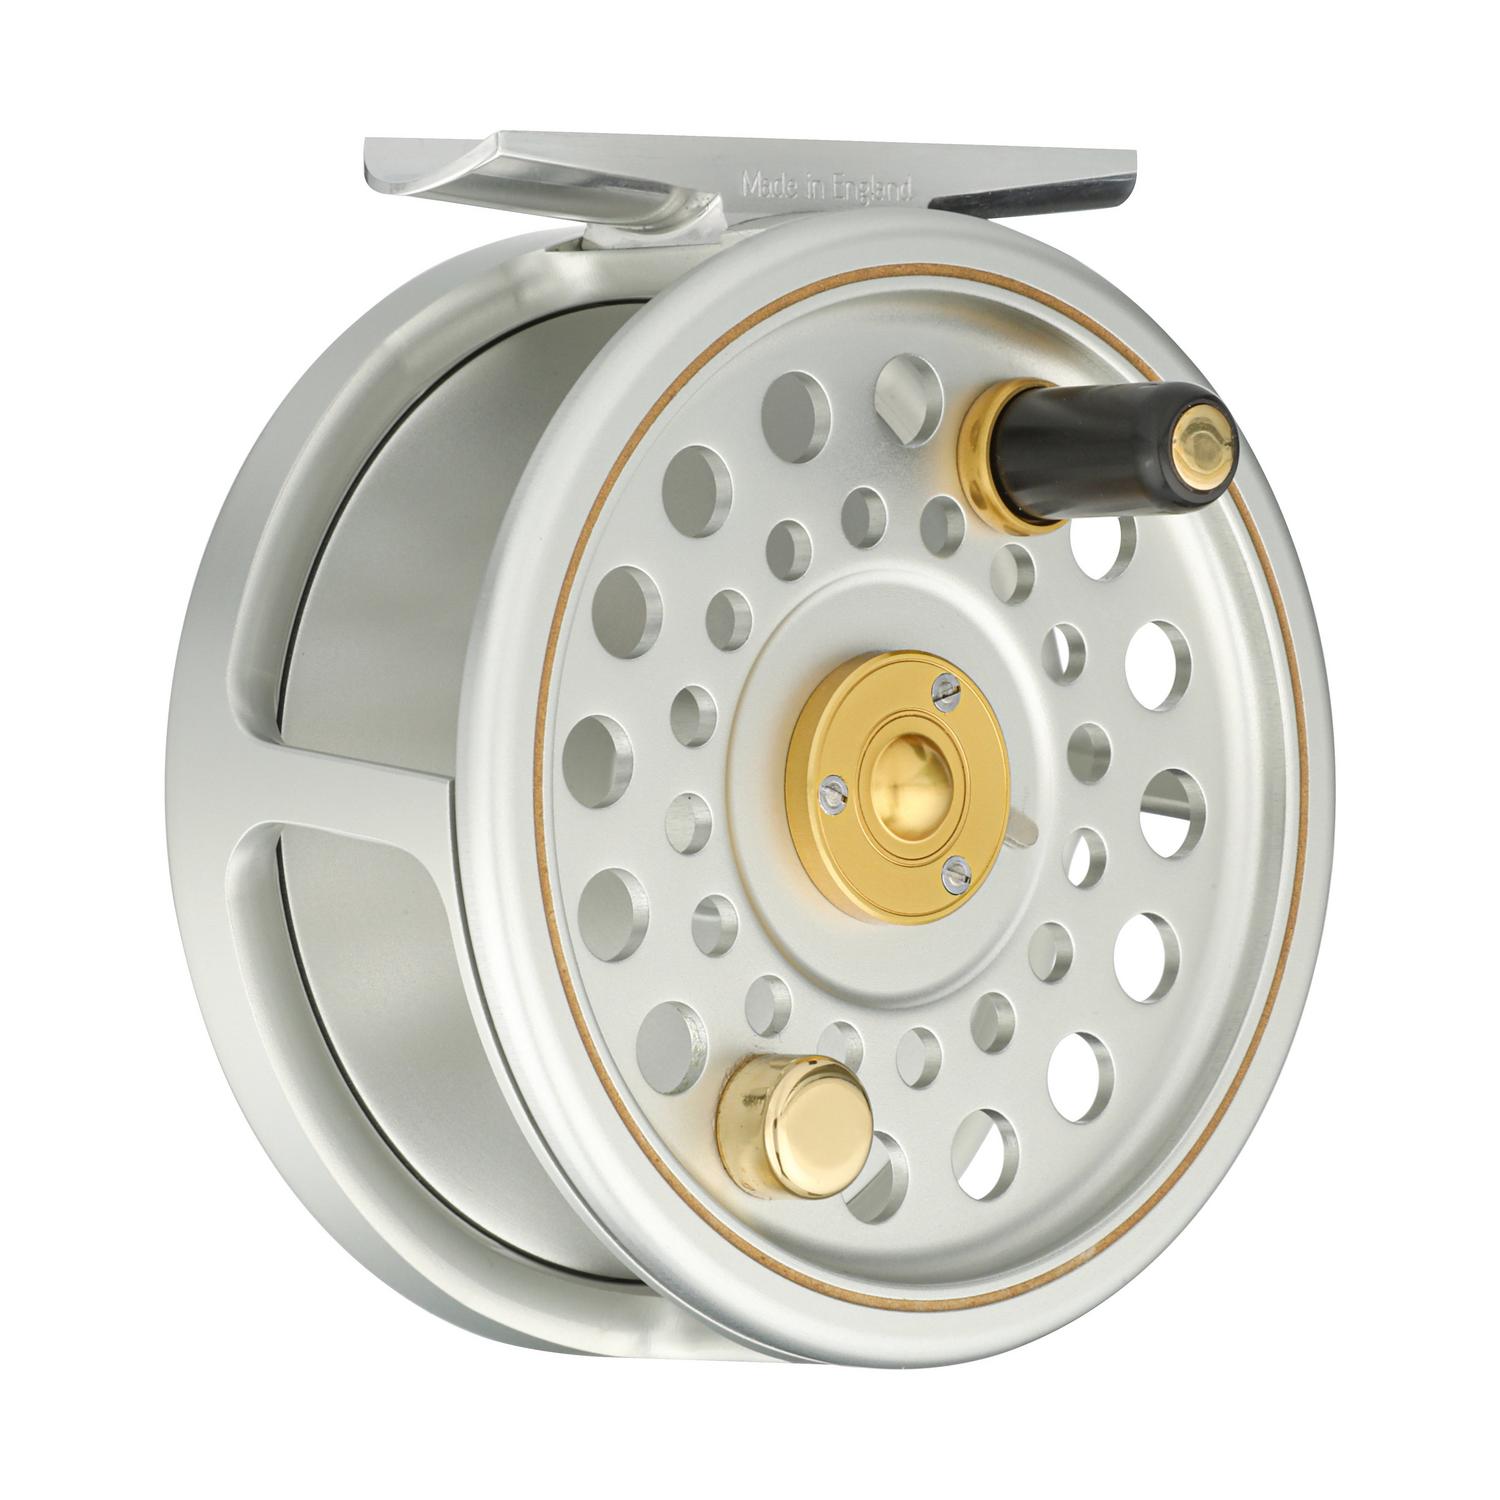 Hardy Sovereign Fly Reel - 7/8 - Spitfire